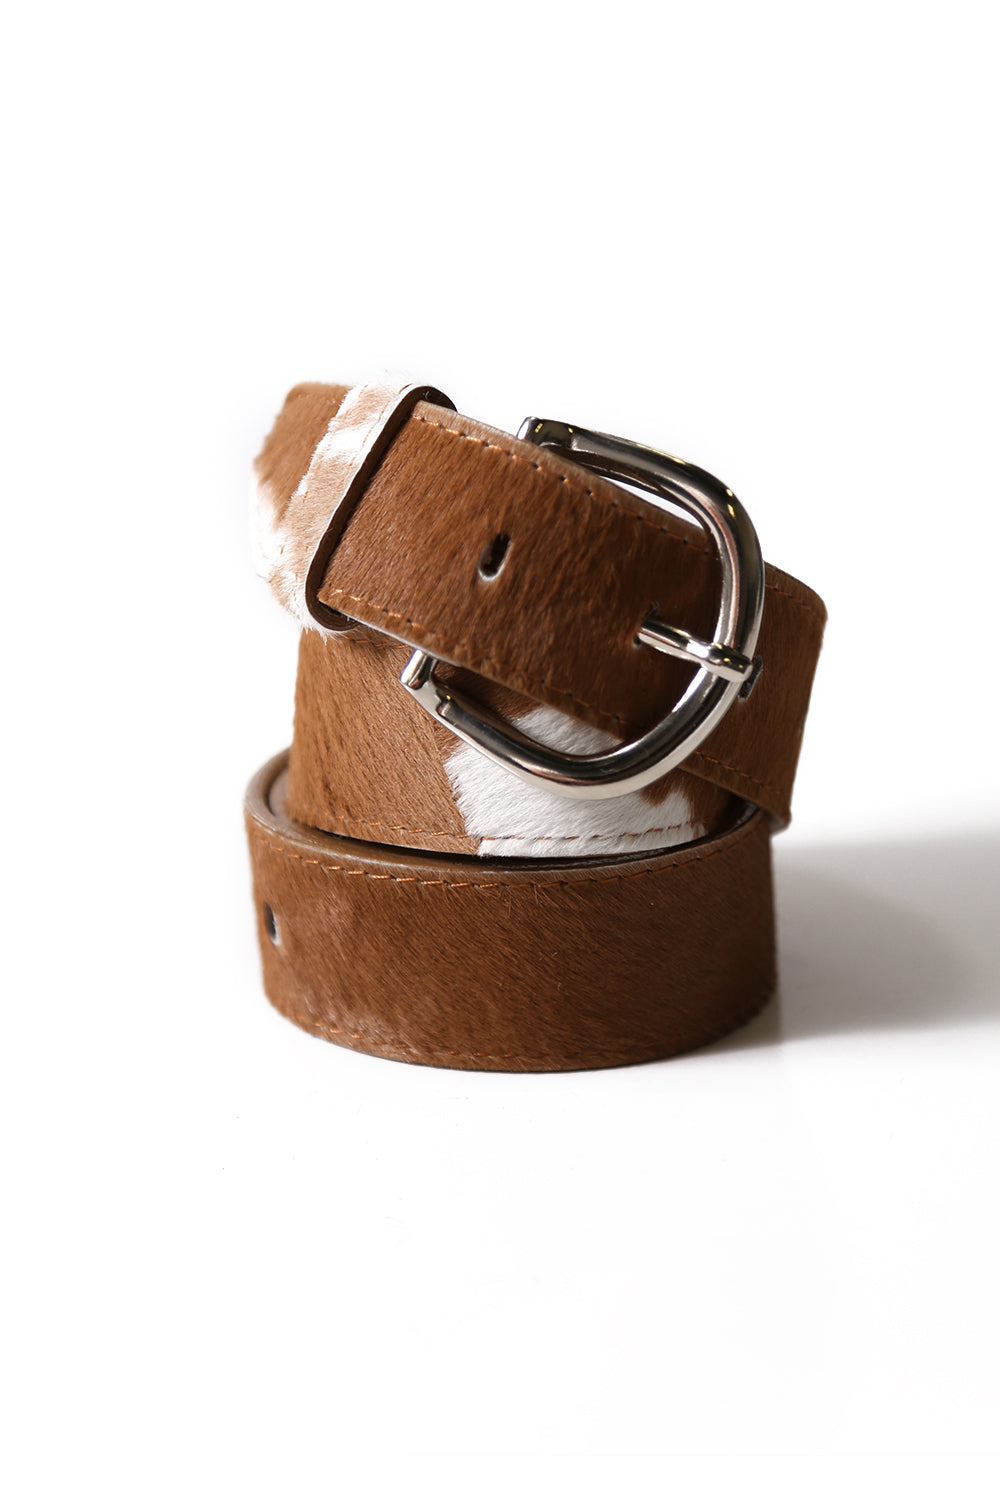 Jeans Belt Tan & White Cowhide Leather